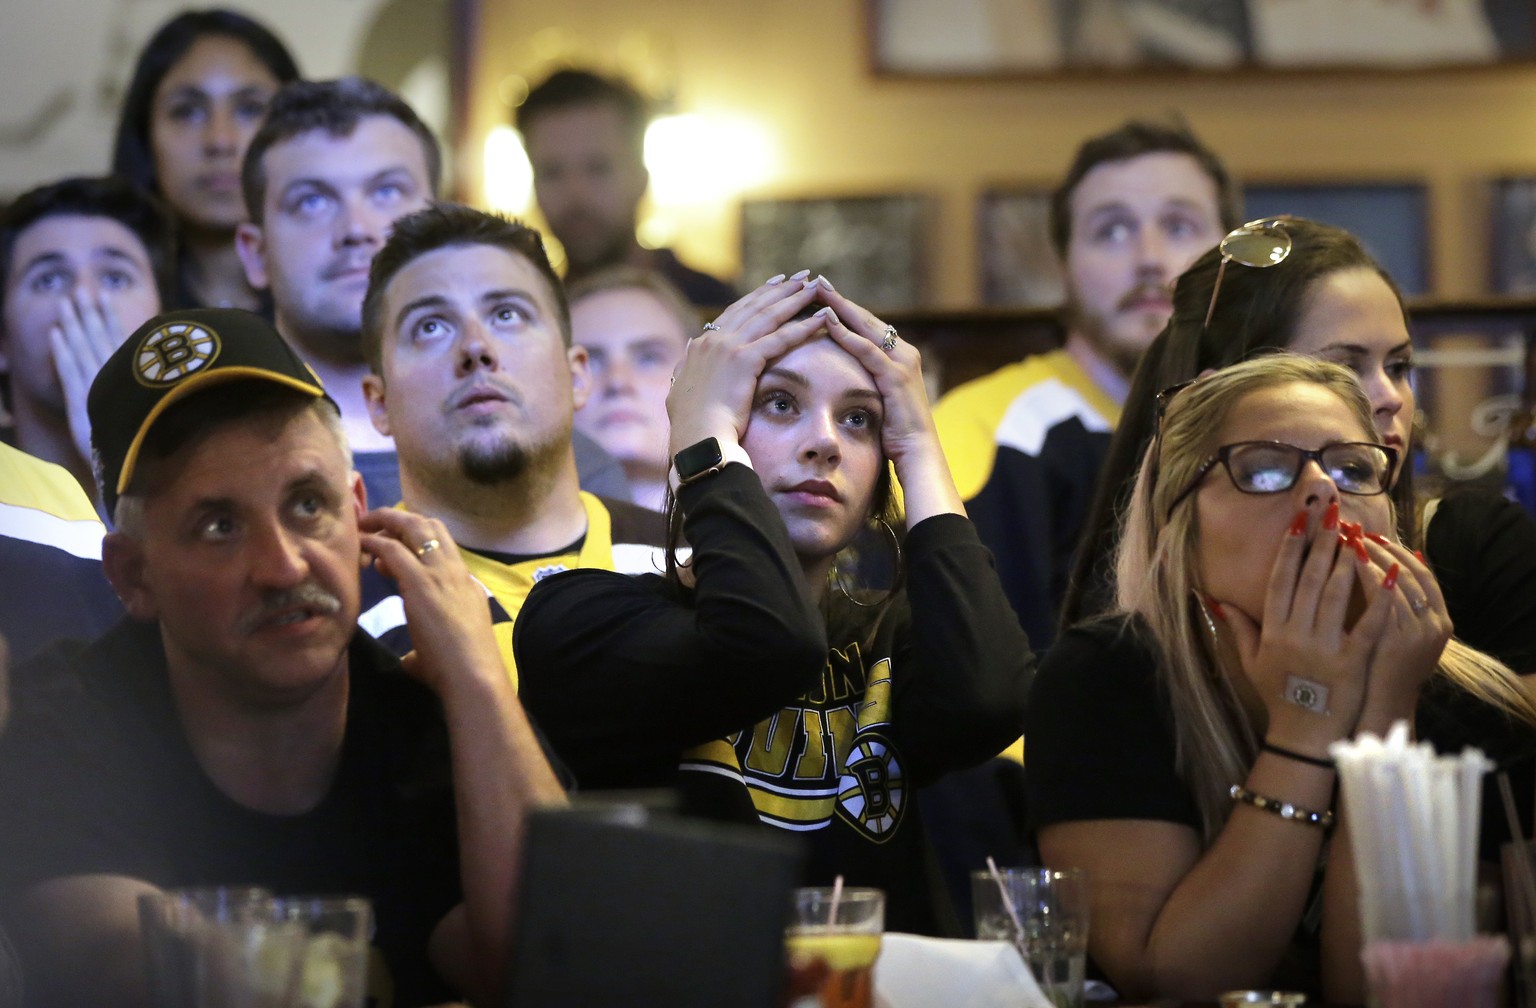 Boston Bruins fans react as the St. Louis Blues score a goal, as the fans watch television coverage of Game 7 of the NHL hockey Stanley Cup Final on Wednesday, June 12, 2019, at a bar in Boston. (AP P ...